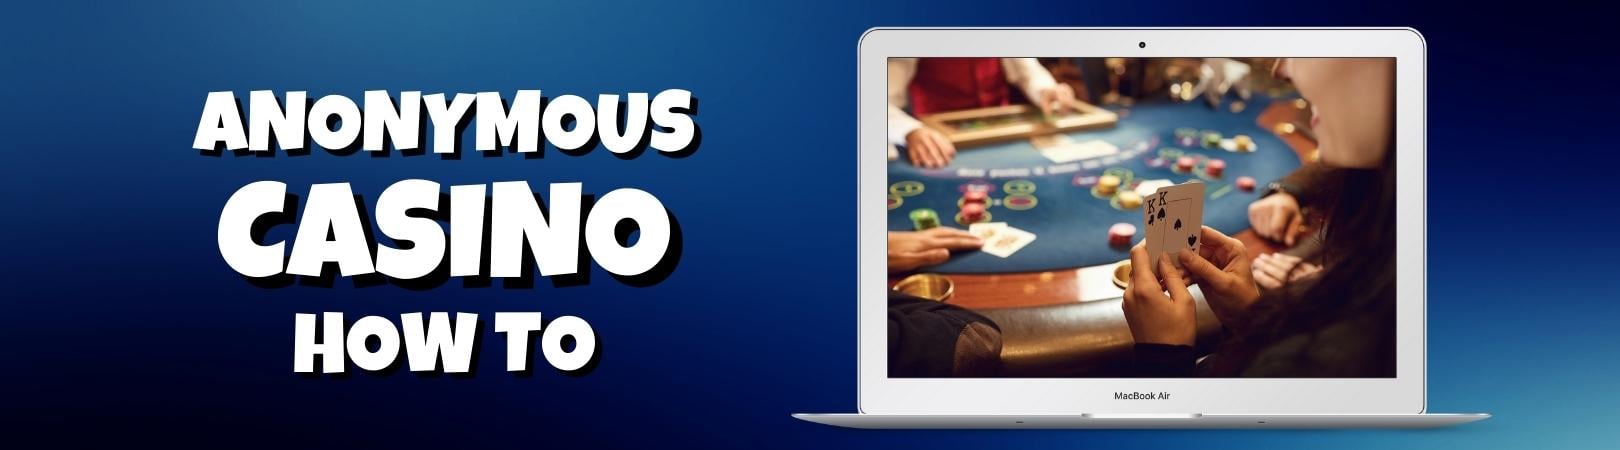 Anonymous casino how to